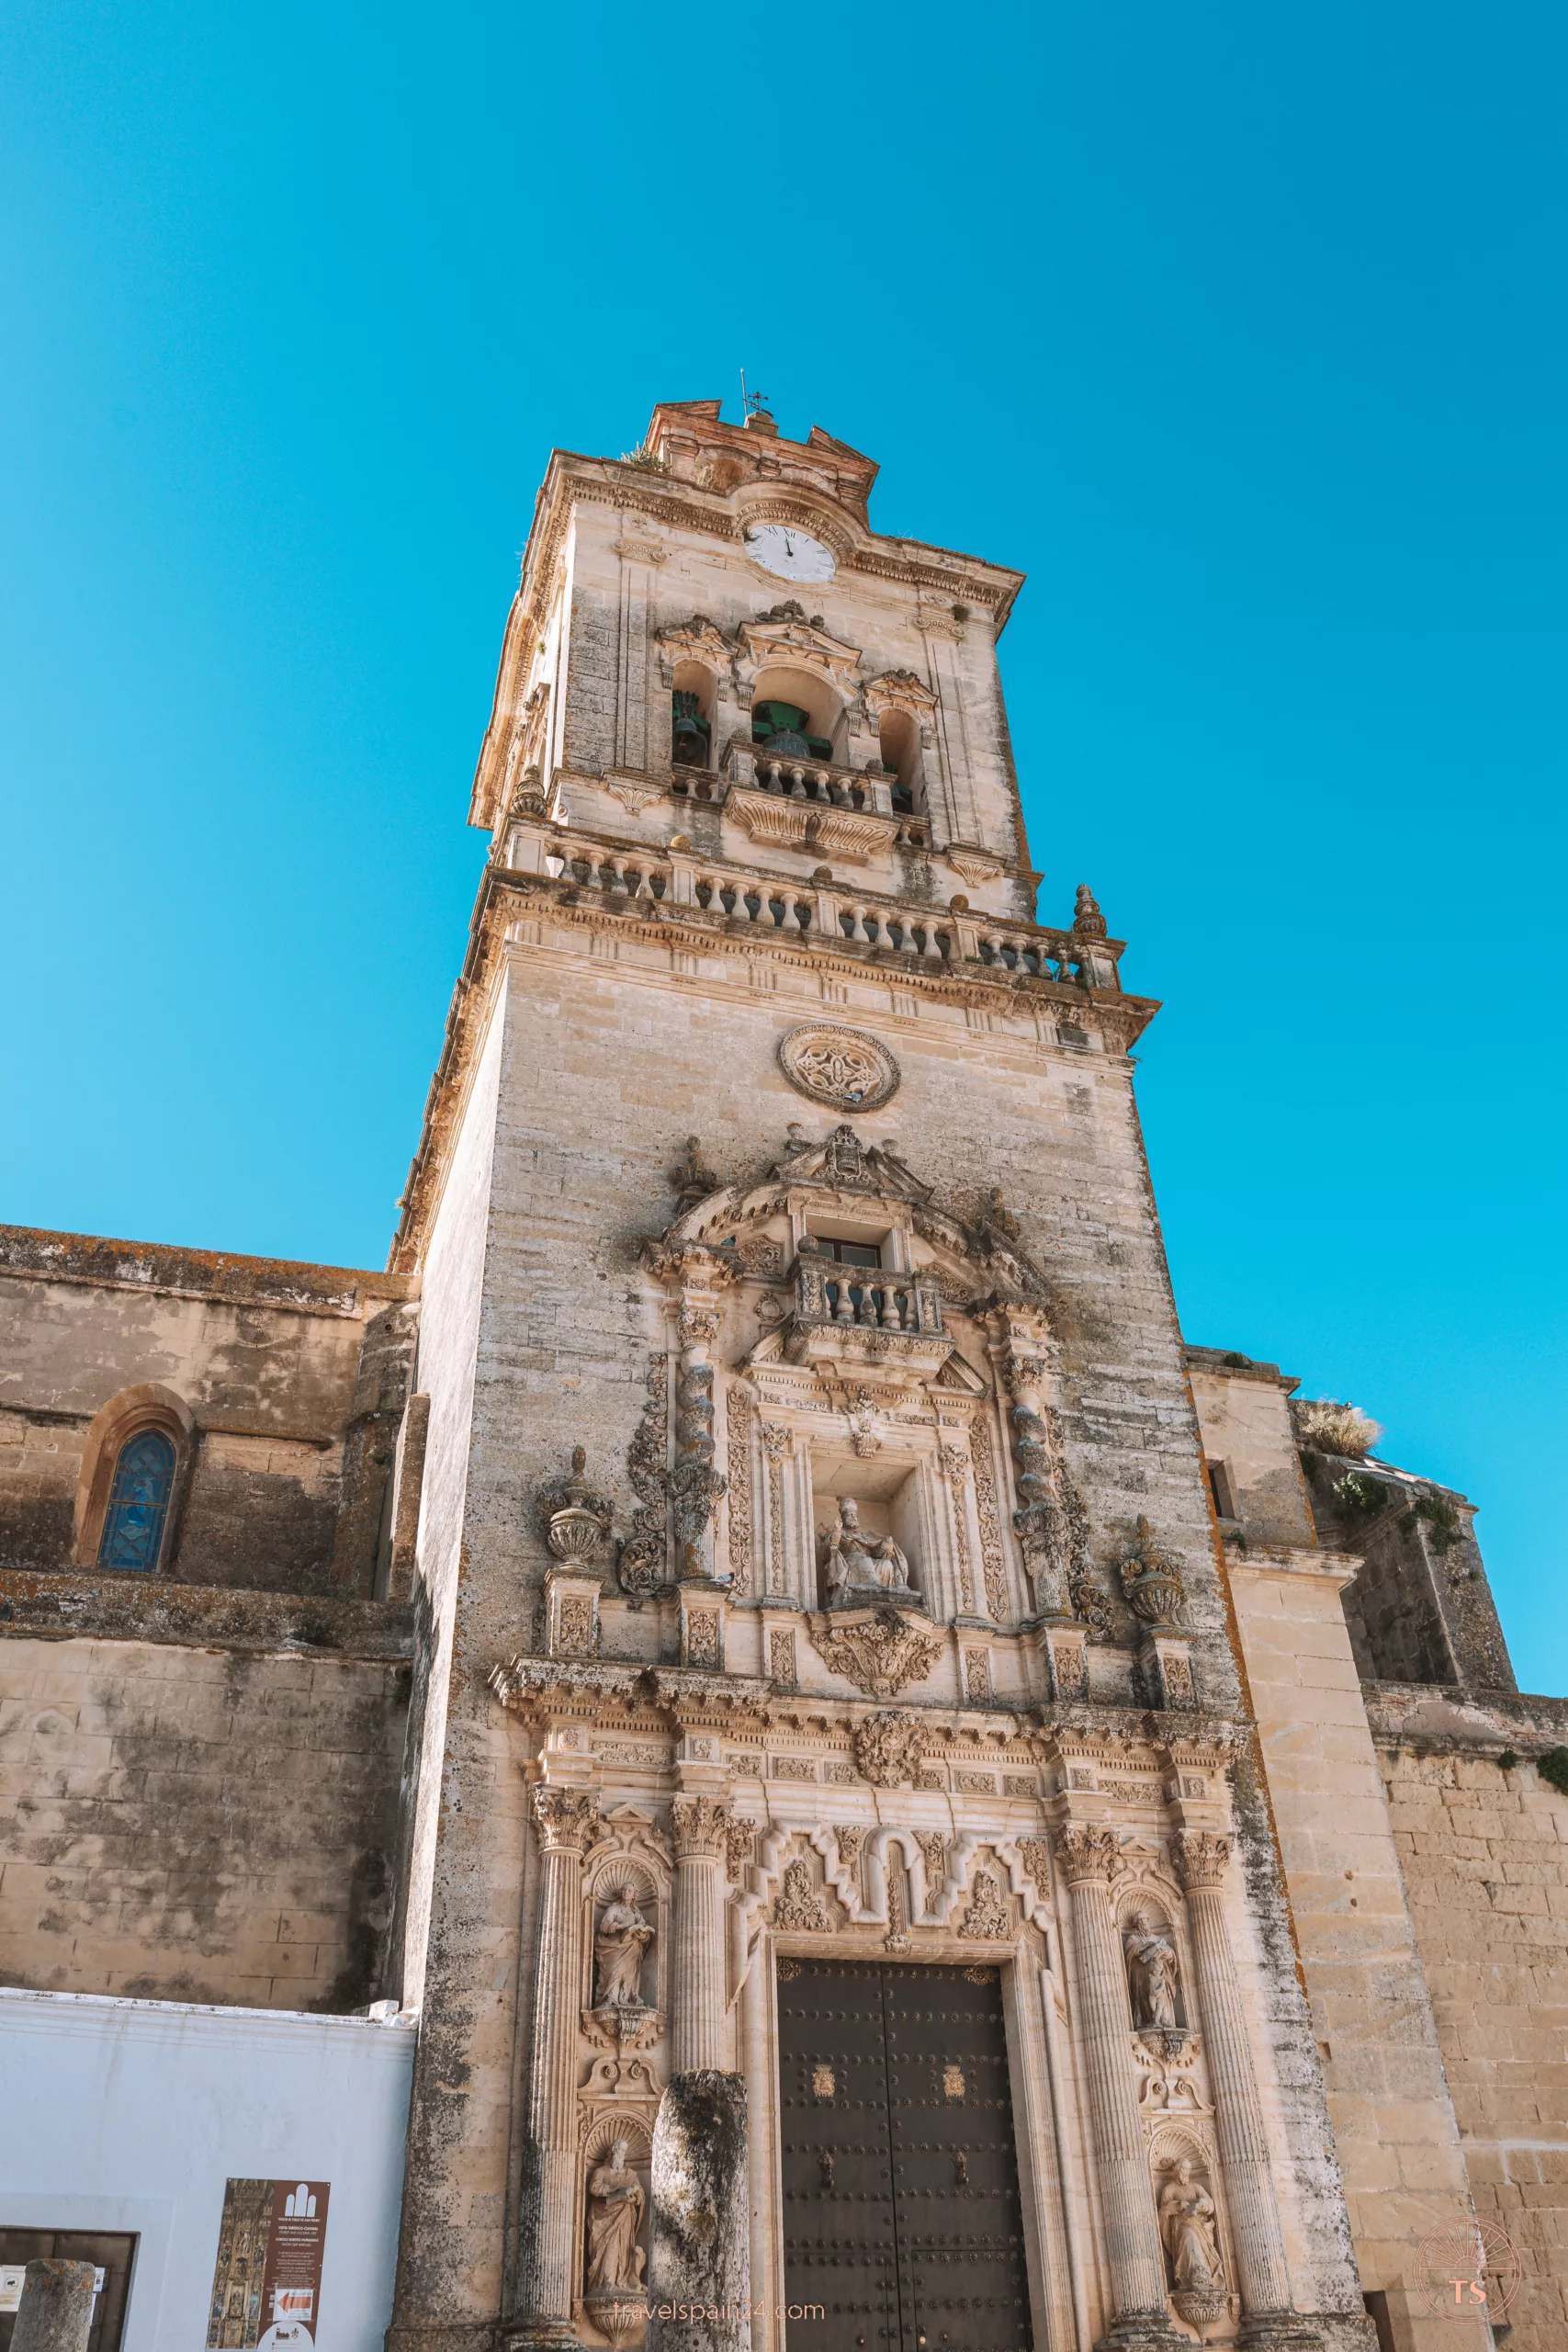 Entrance and clock tower of Iglesia de San Pedro in Arcos de la Frontera. The old wooden doors are beneath a sacred carved image, and the tower features detailed architectural carvings.